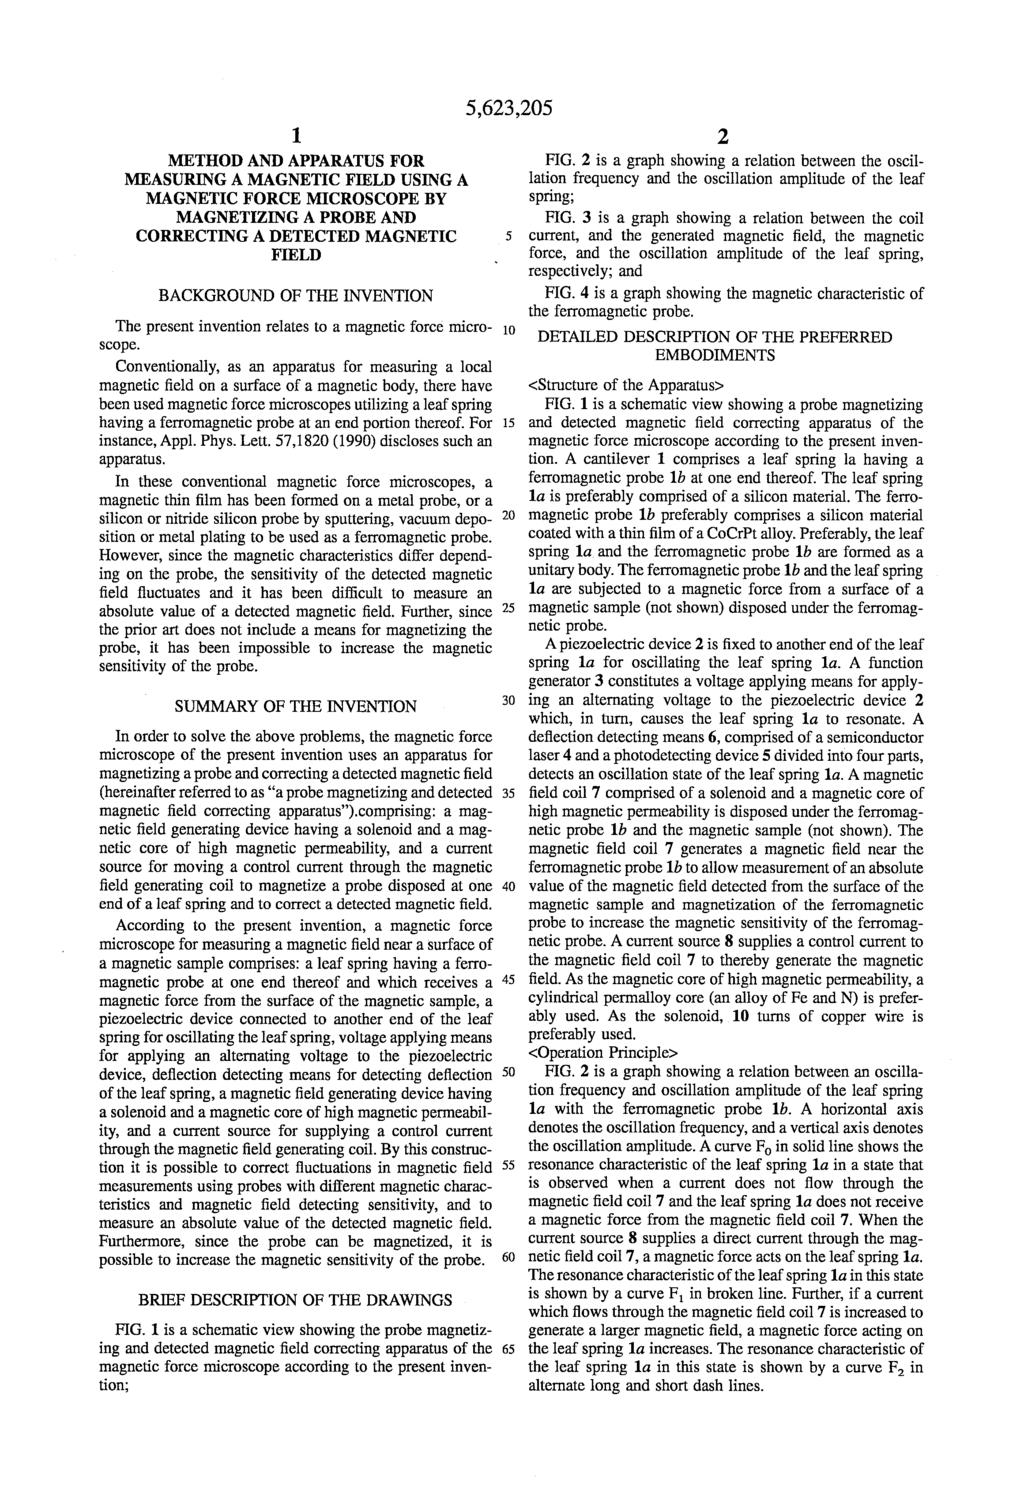 1. METHOD AND APPARATUS FOR MEASURING AMAGNETIC FELD USING A MAGNETIC FORCE MCROSCOPE BY MAGNETZING A PROBE AND CORRECTING A DETECTED MAGNETIC FIELD BACKGROUND OF THE INVENTION The present invention